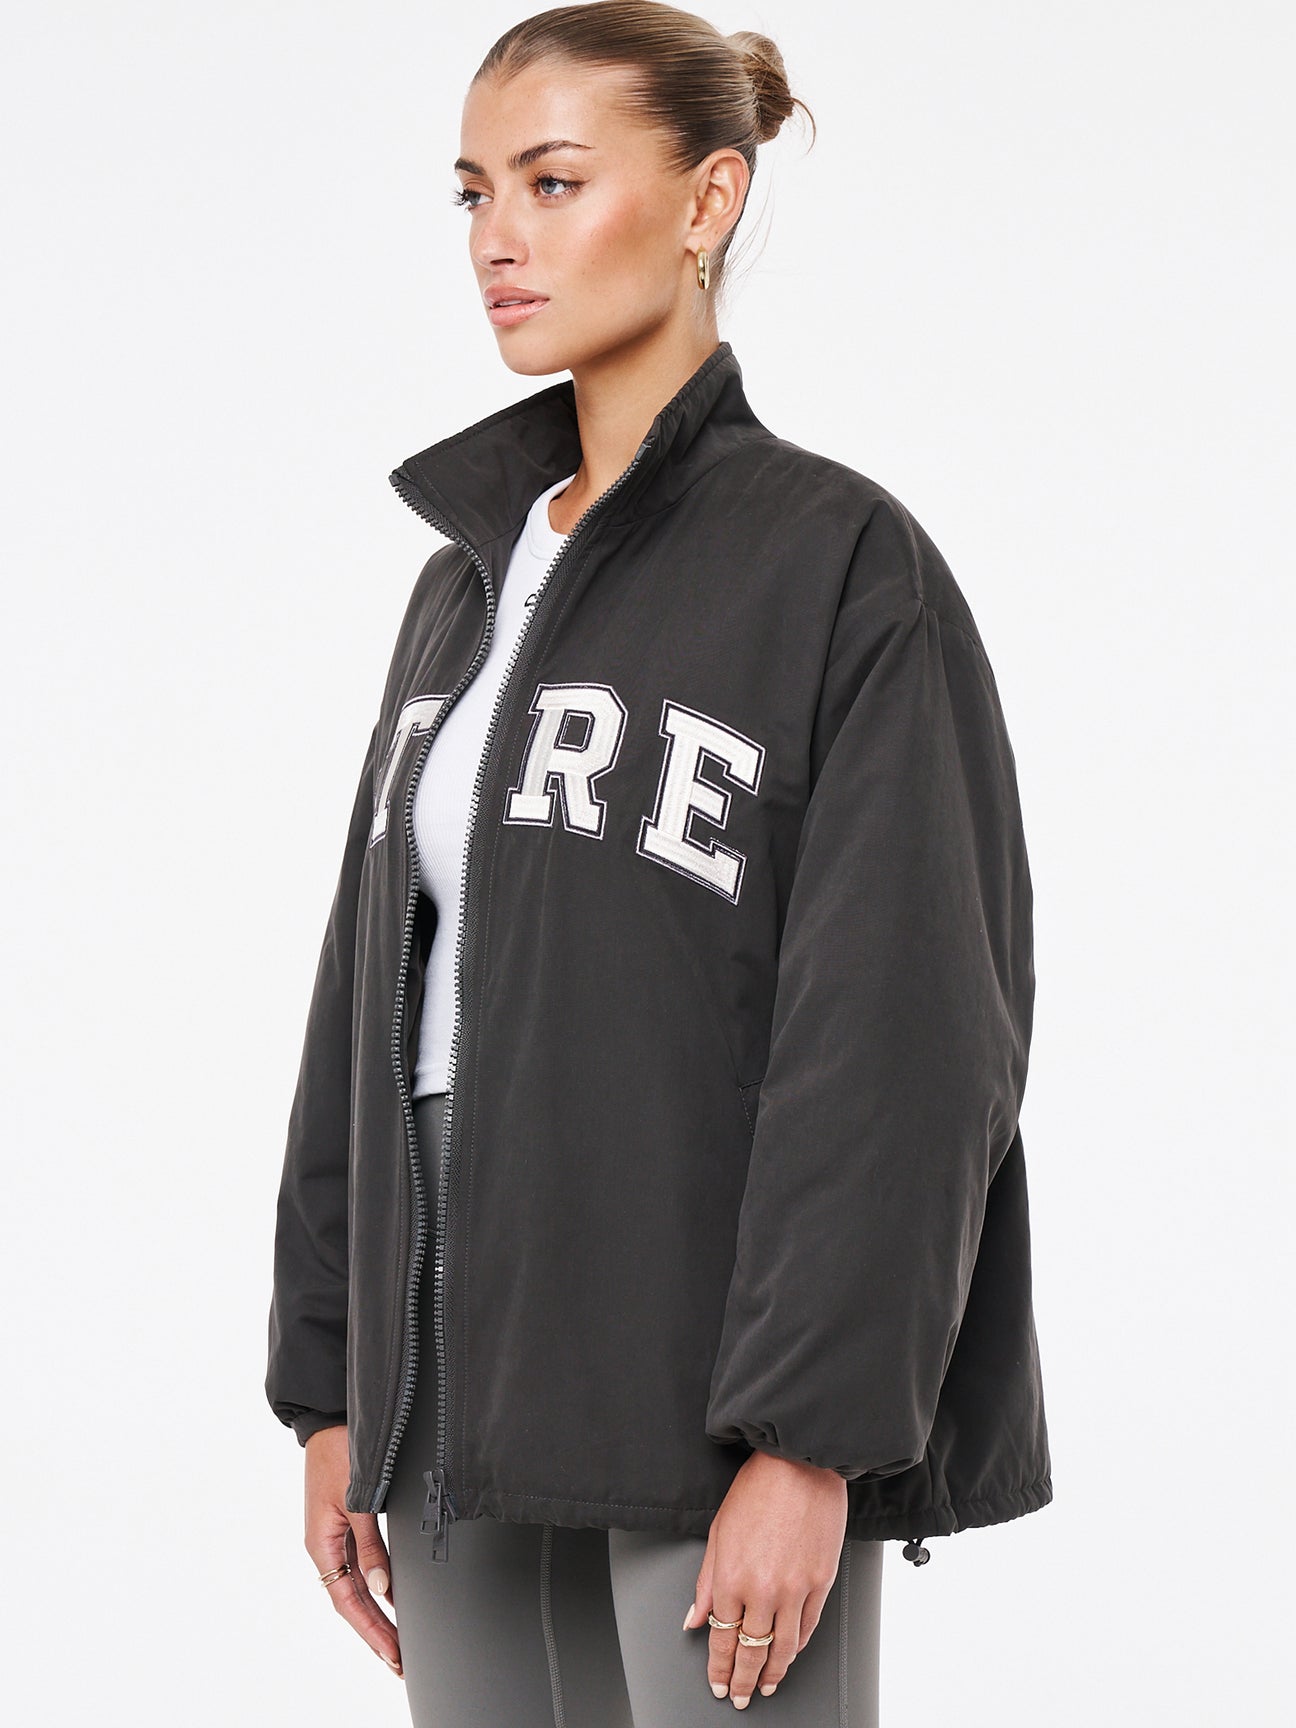 Women's Coats & Jackets | Puffers & Parkas | The Couture Club